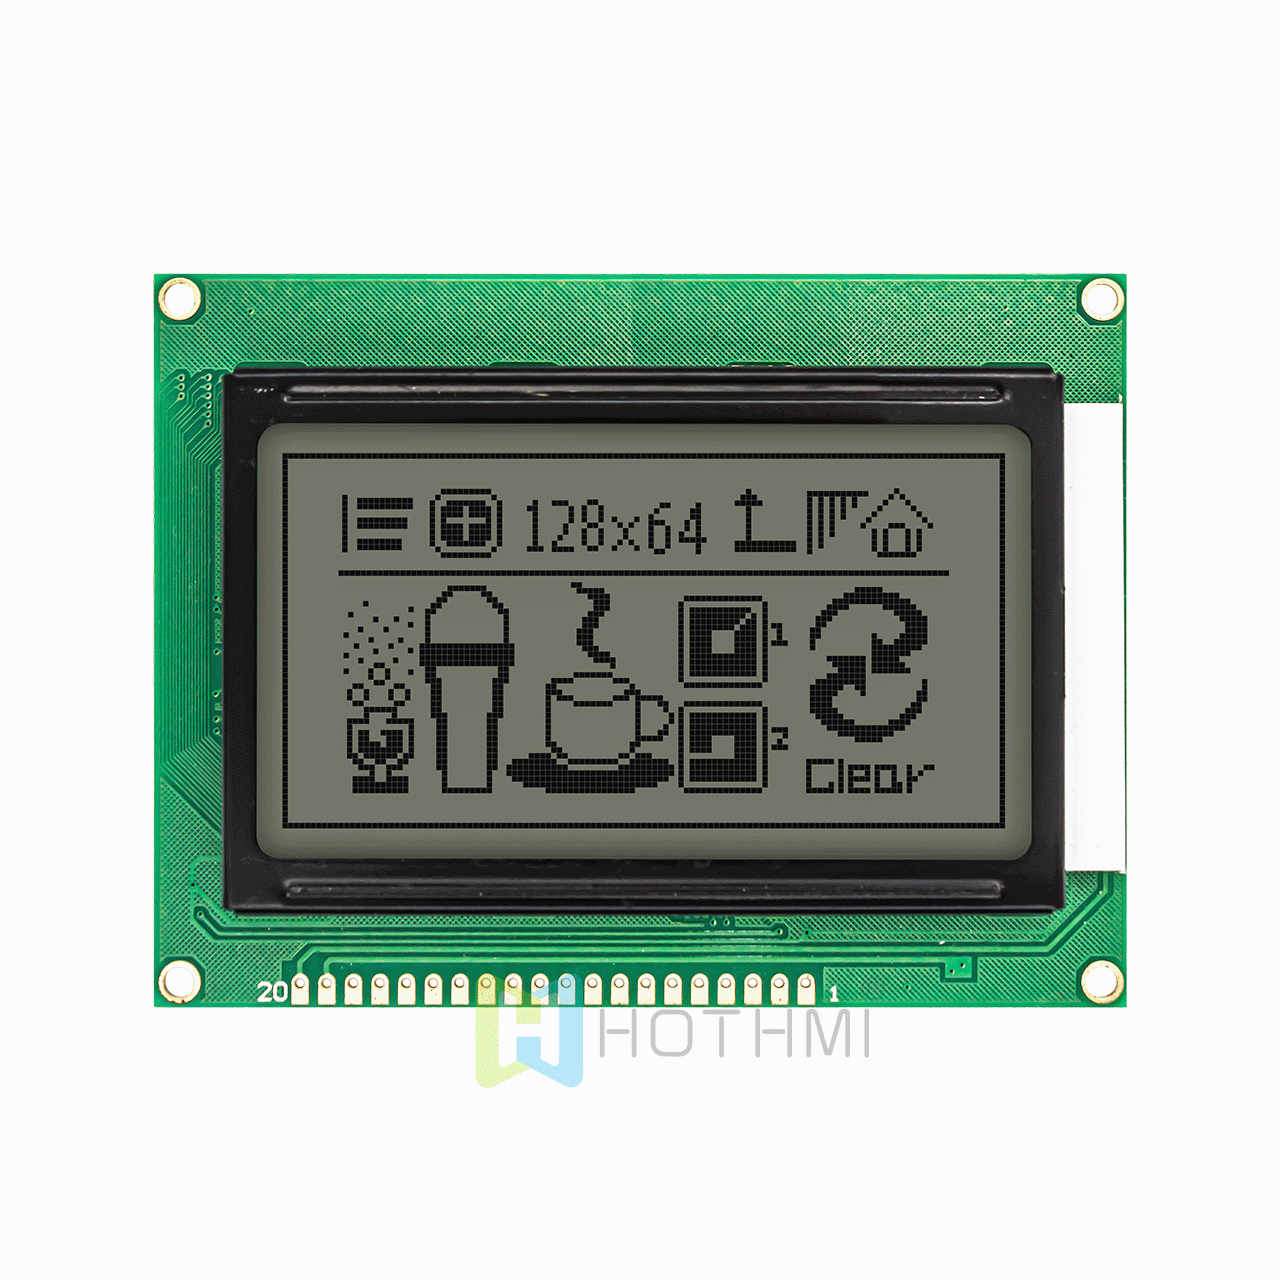 3.2-inch 128X64 monochrome graphic dot matrix module LCM/12864 LCD graphic display module/white background gray characters/ST7920 control chip